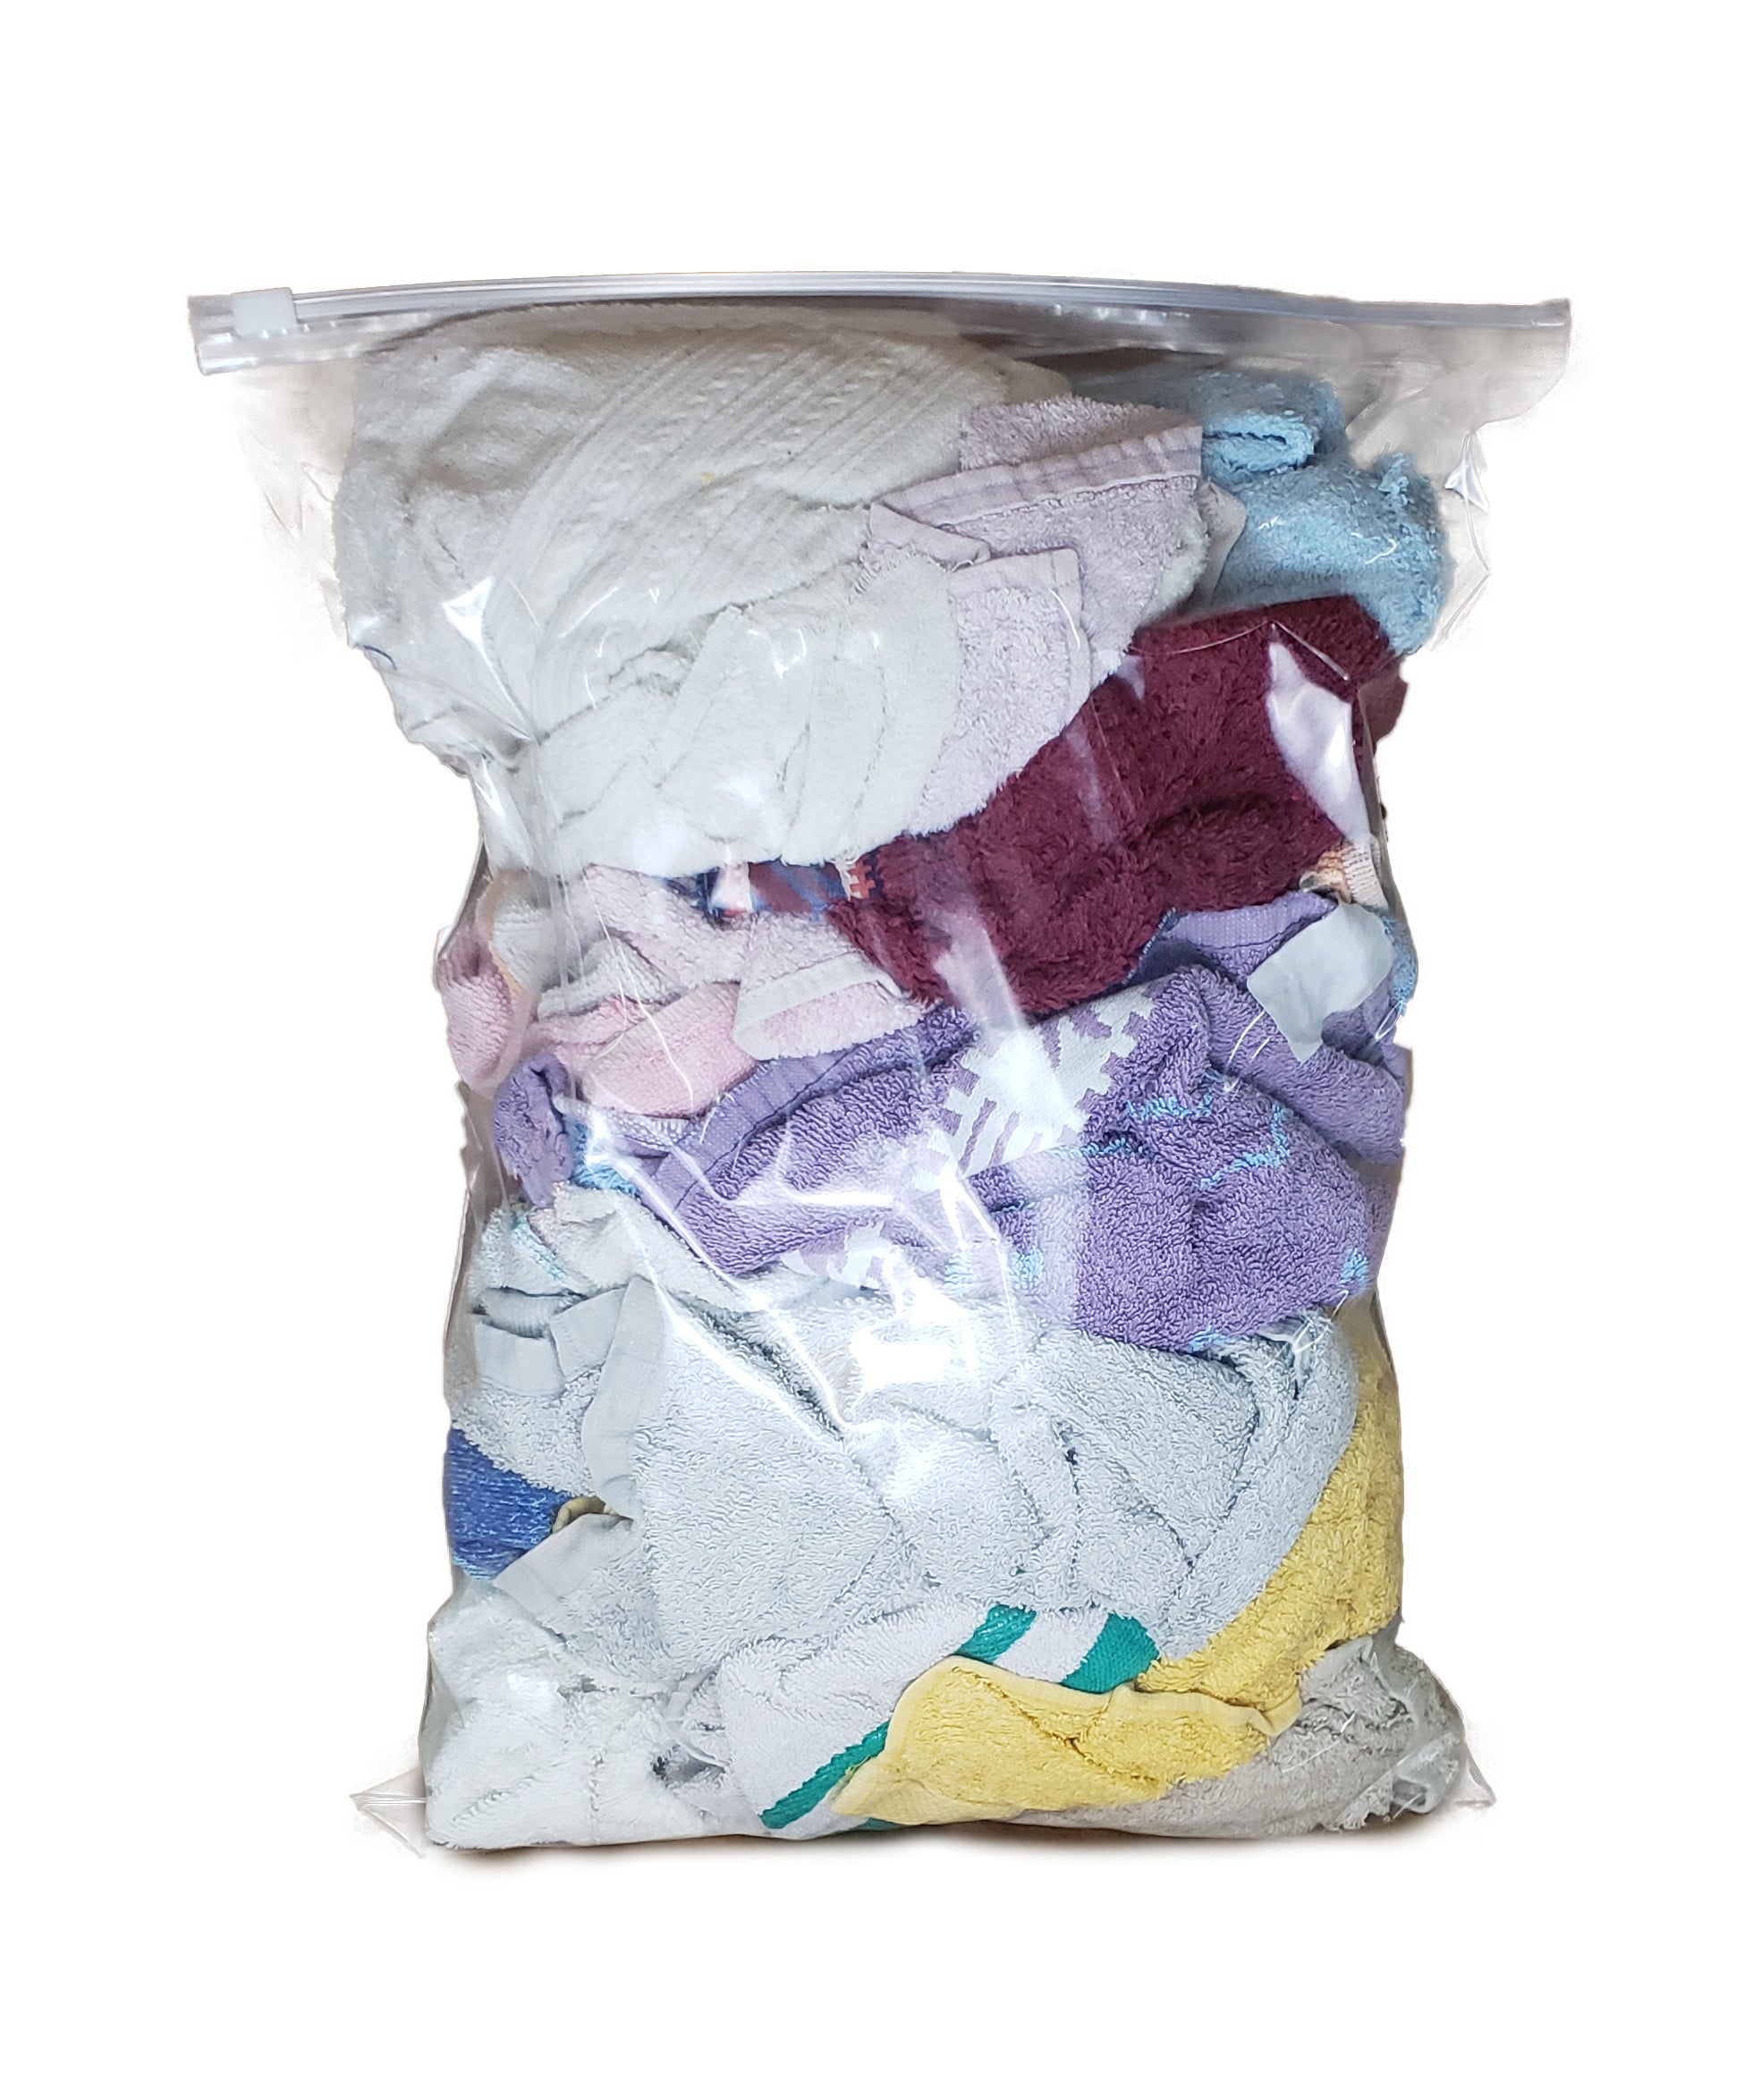 Pro-Clean Basics A99604 Recycled Cloth Rags, 4 lb. Bag, Colored